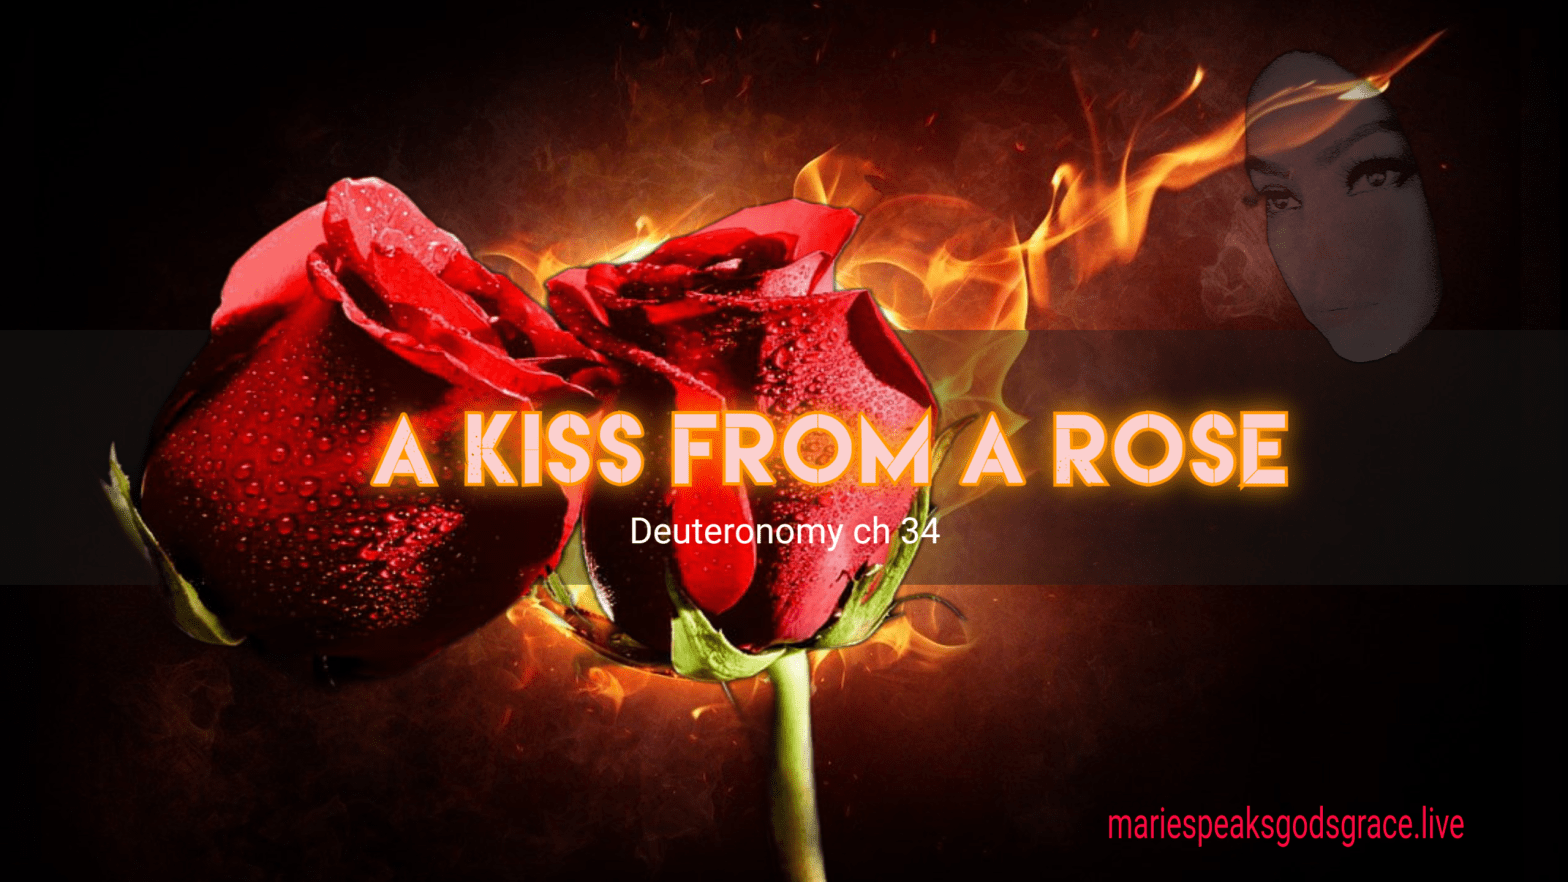 Deuteronomy ch 34: A Kiss from a Rose